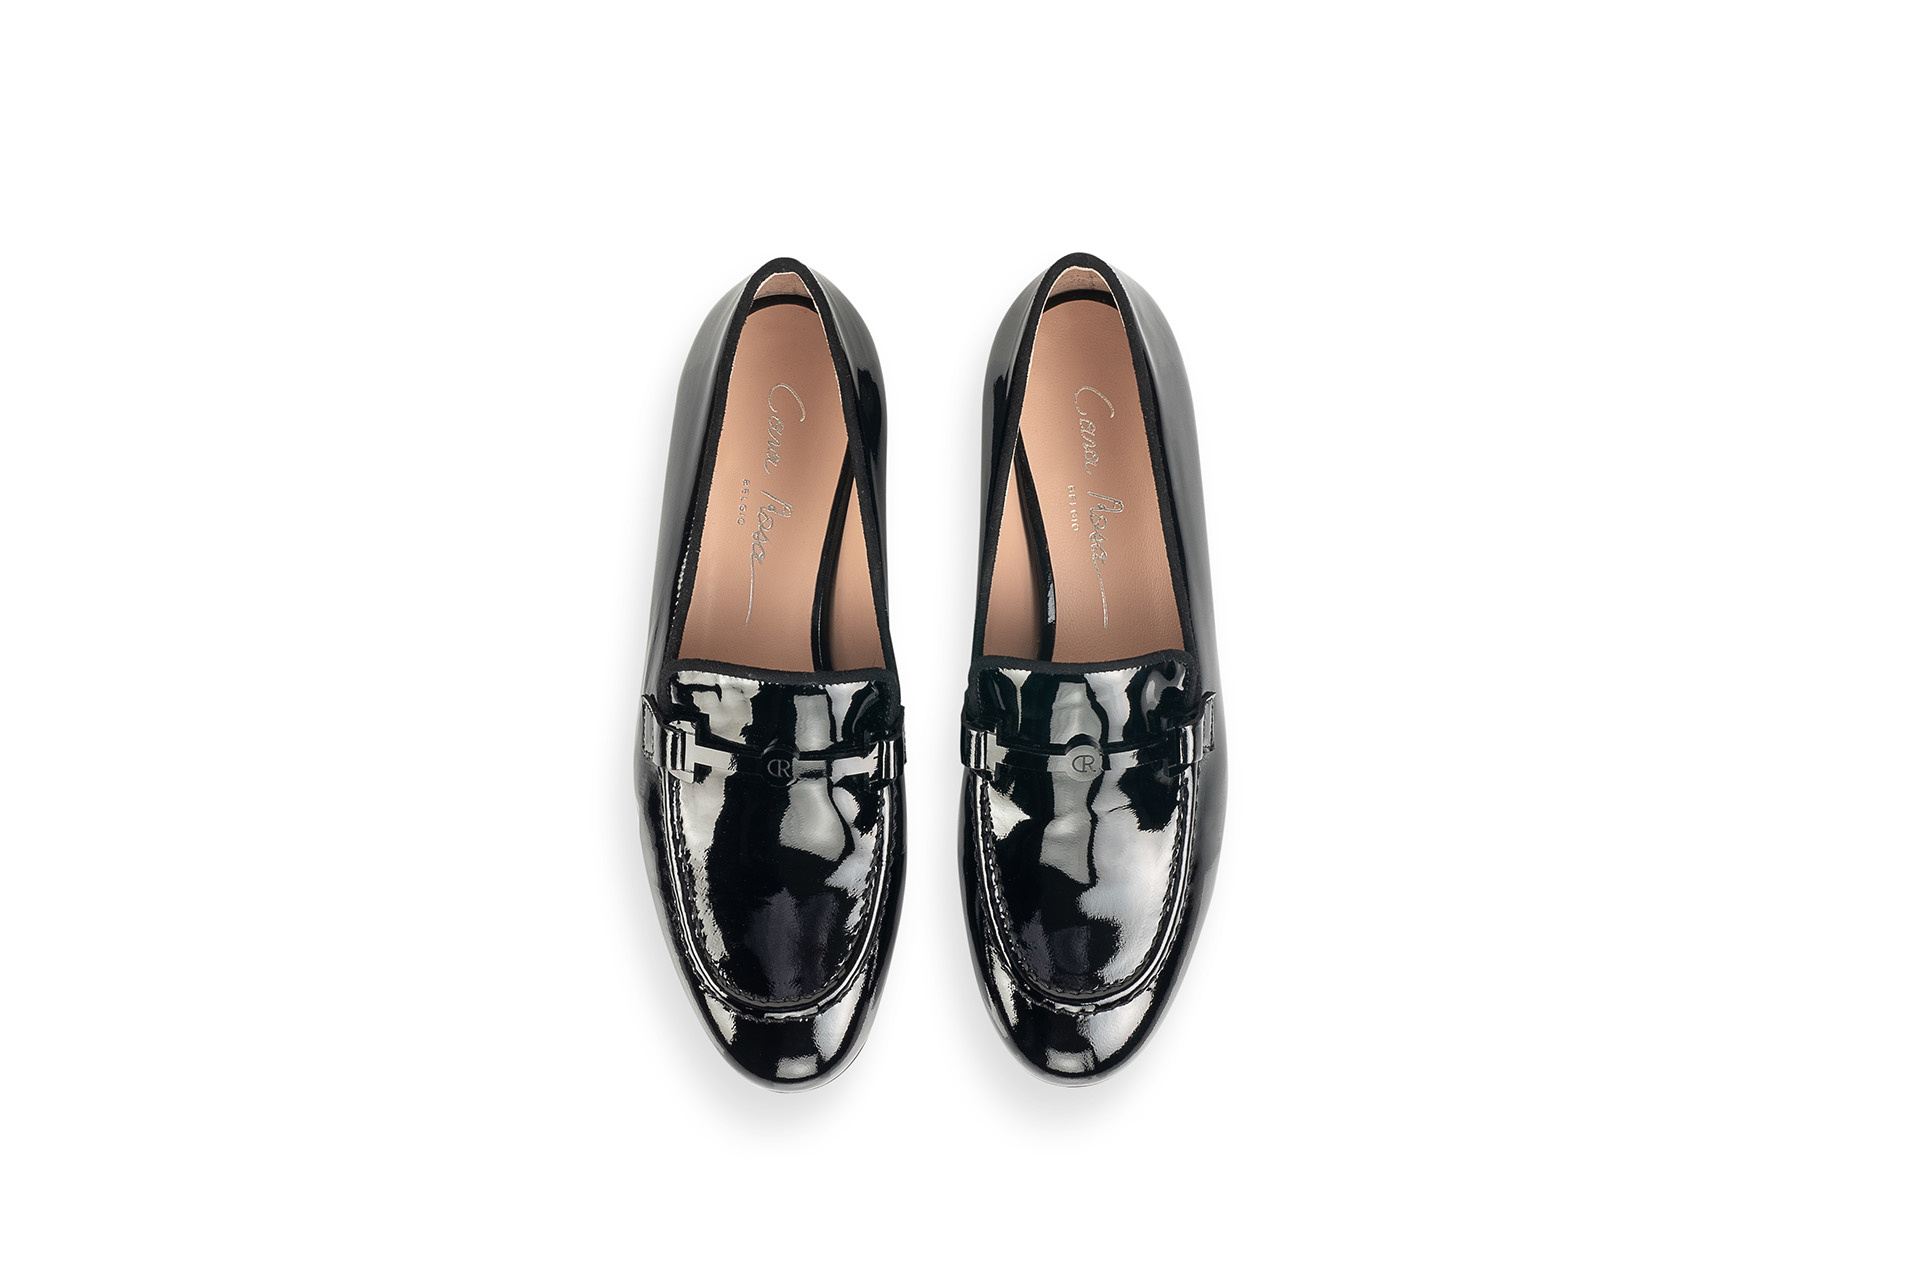 The Carini patent leather shoes are the best working shoes for women. -  Cara Rosa